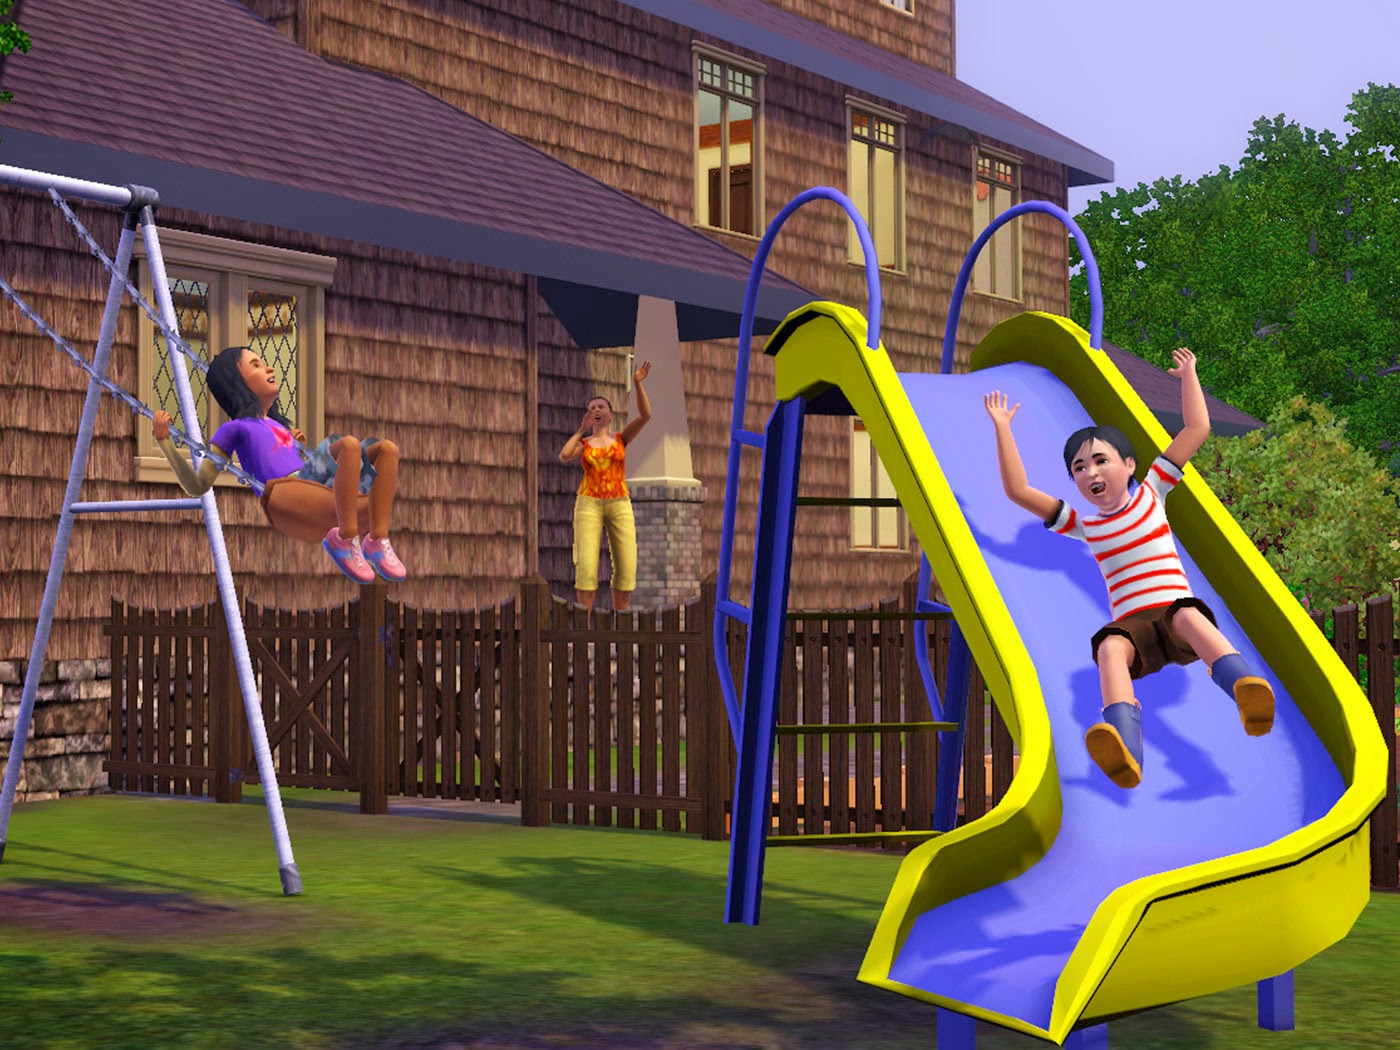 Free PC Game Full Version Download: Free Download The SIMS 2 PC Game